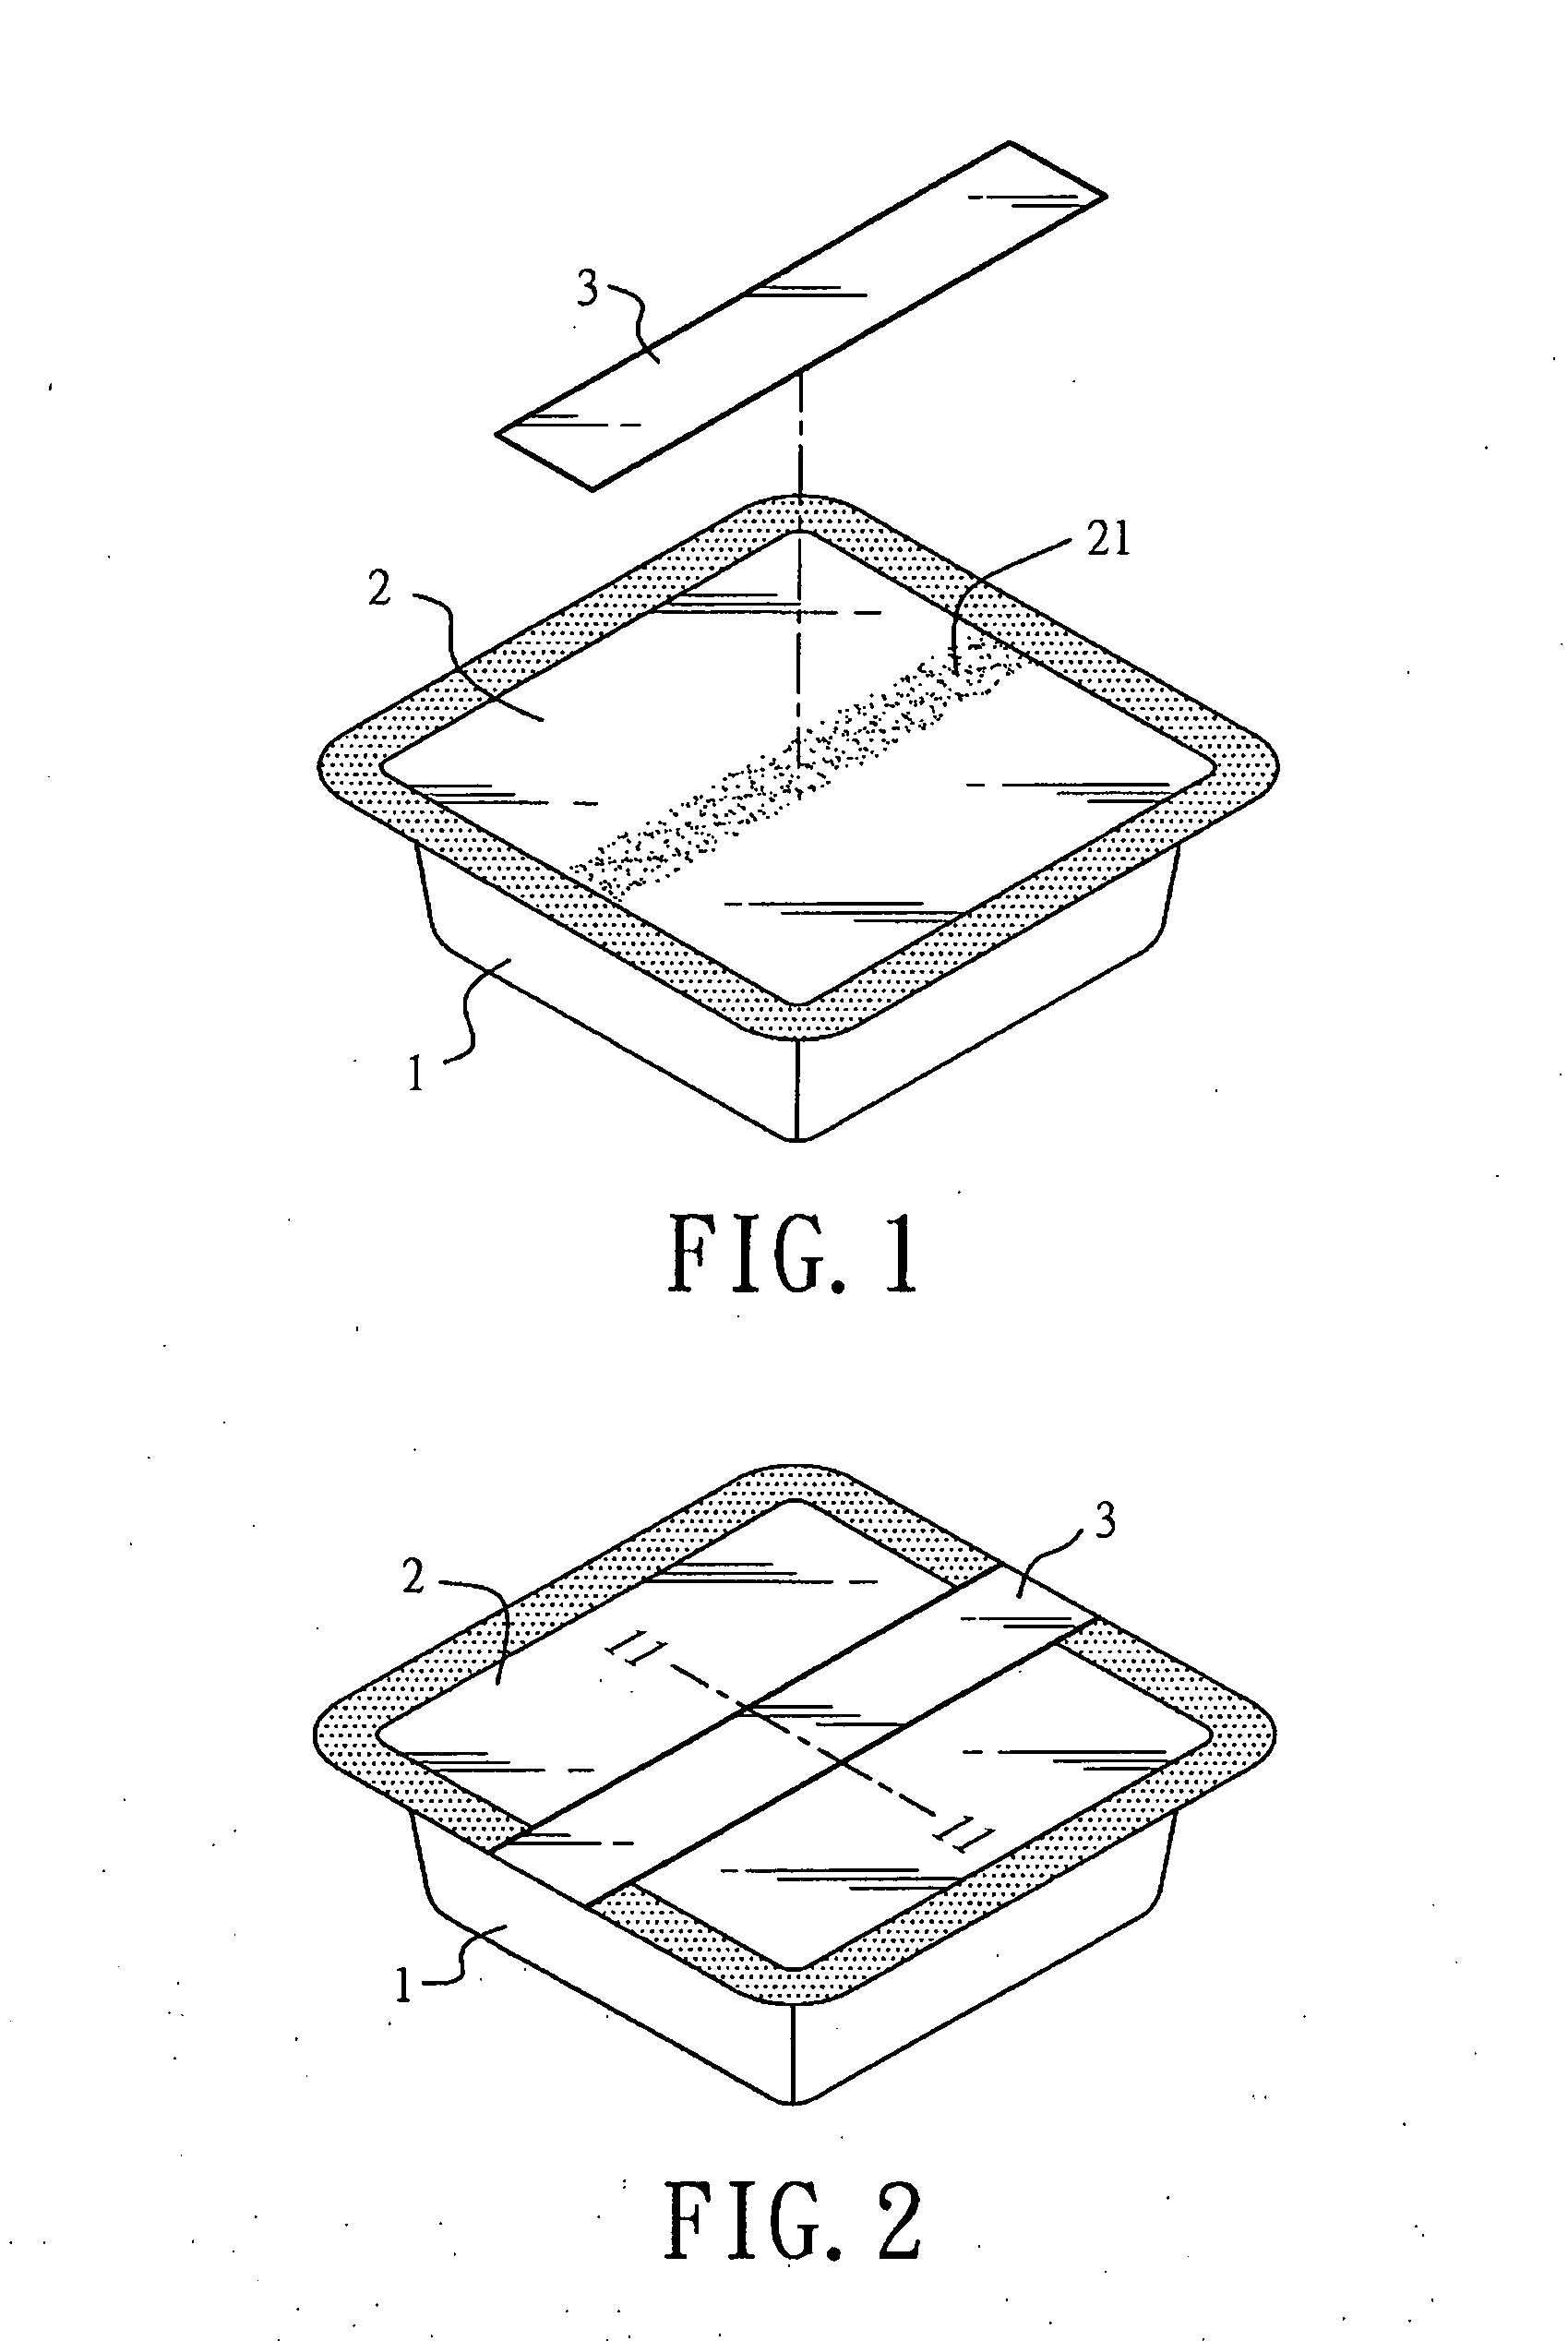 Composite Film for Packing Foods and the Process of Making it